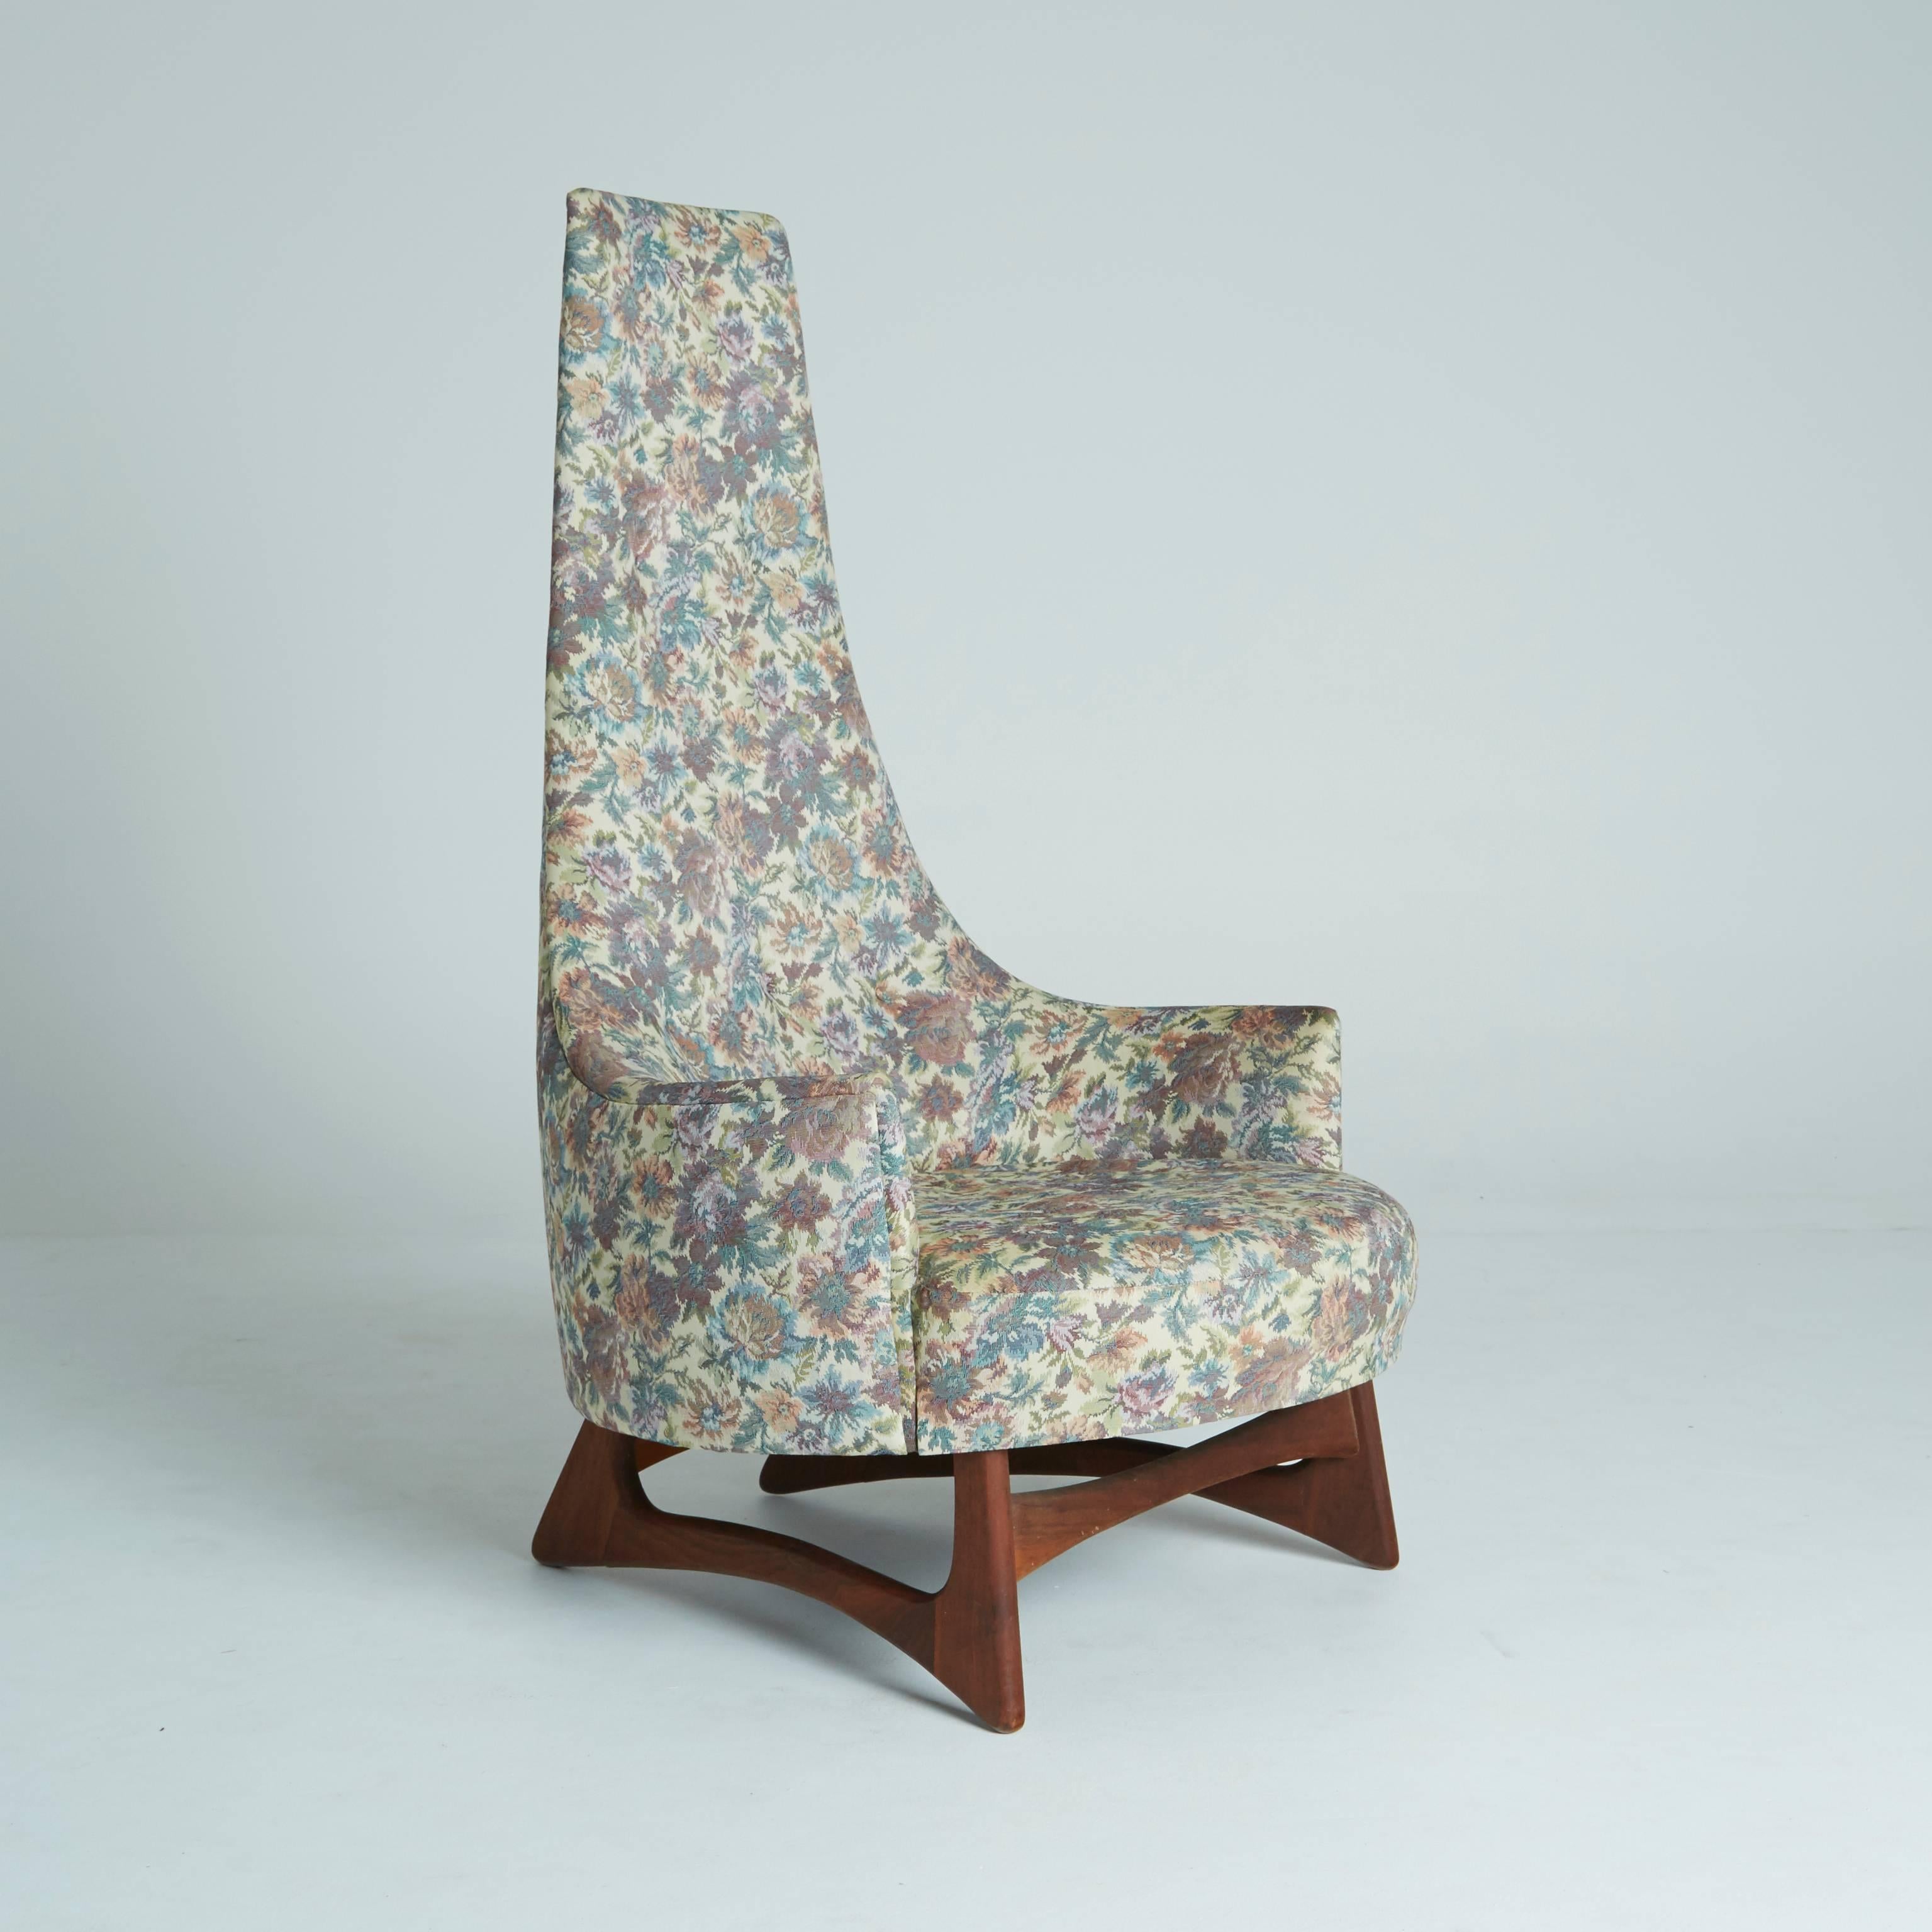 This Adrian Pearsall high back lounge-chair or armchair is a regal Mid-Century Modern Classic.

The biomorphic curvature of the sculpted walnut legs beautifully offsets the funky, floral pattern. Consider this for a reading chair, corner chair, a